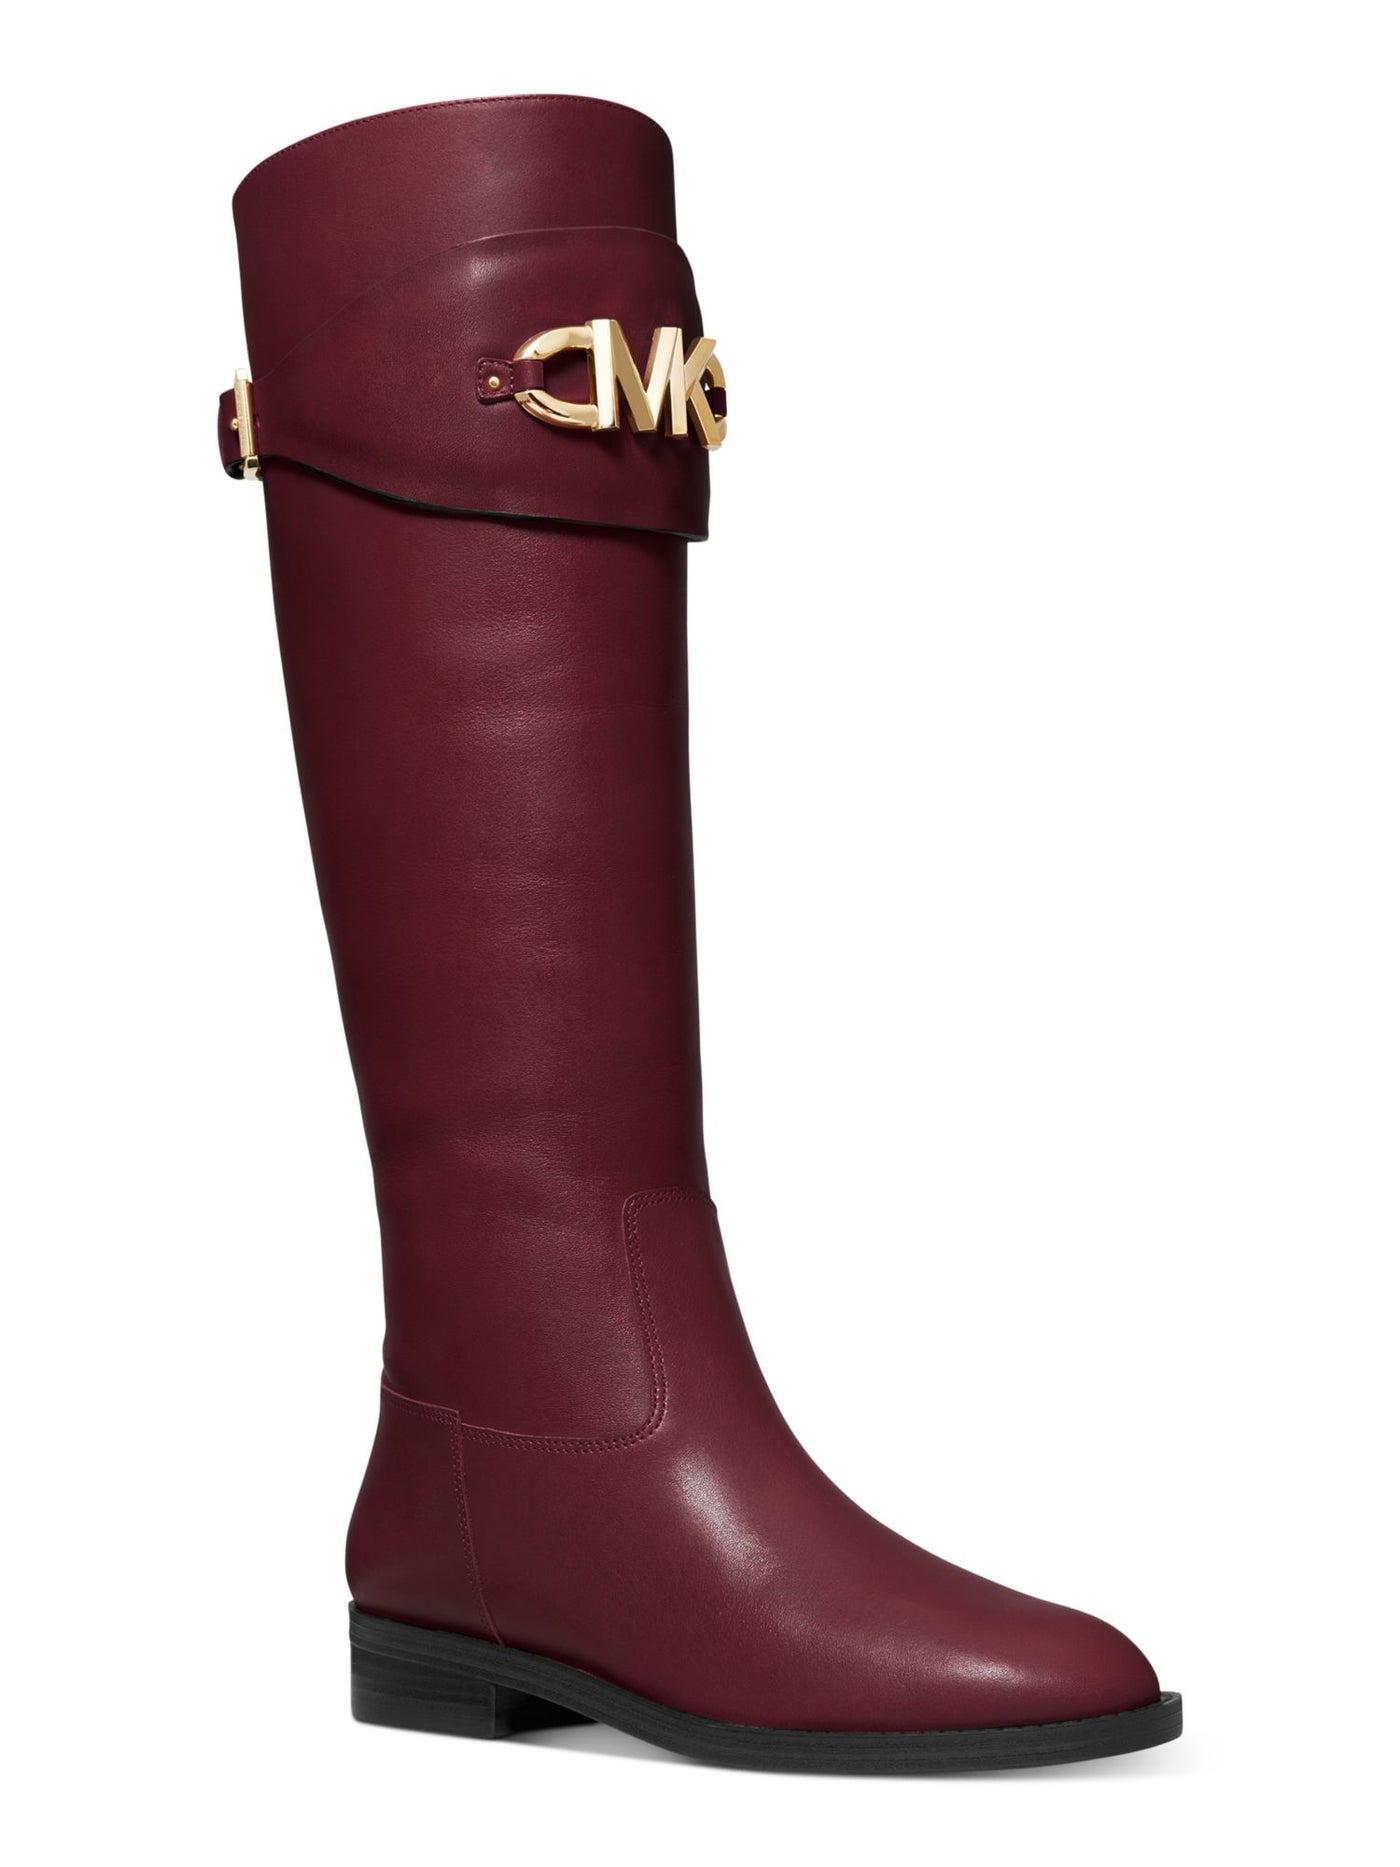 MICHAEL MICHAEL KORS Womens Burgundy Strap With Hardware Padded Goring Izzy Round Toe Block Heel Zip-Up Leather Riding Boot 8.5 M